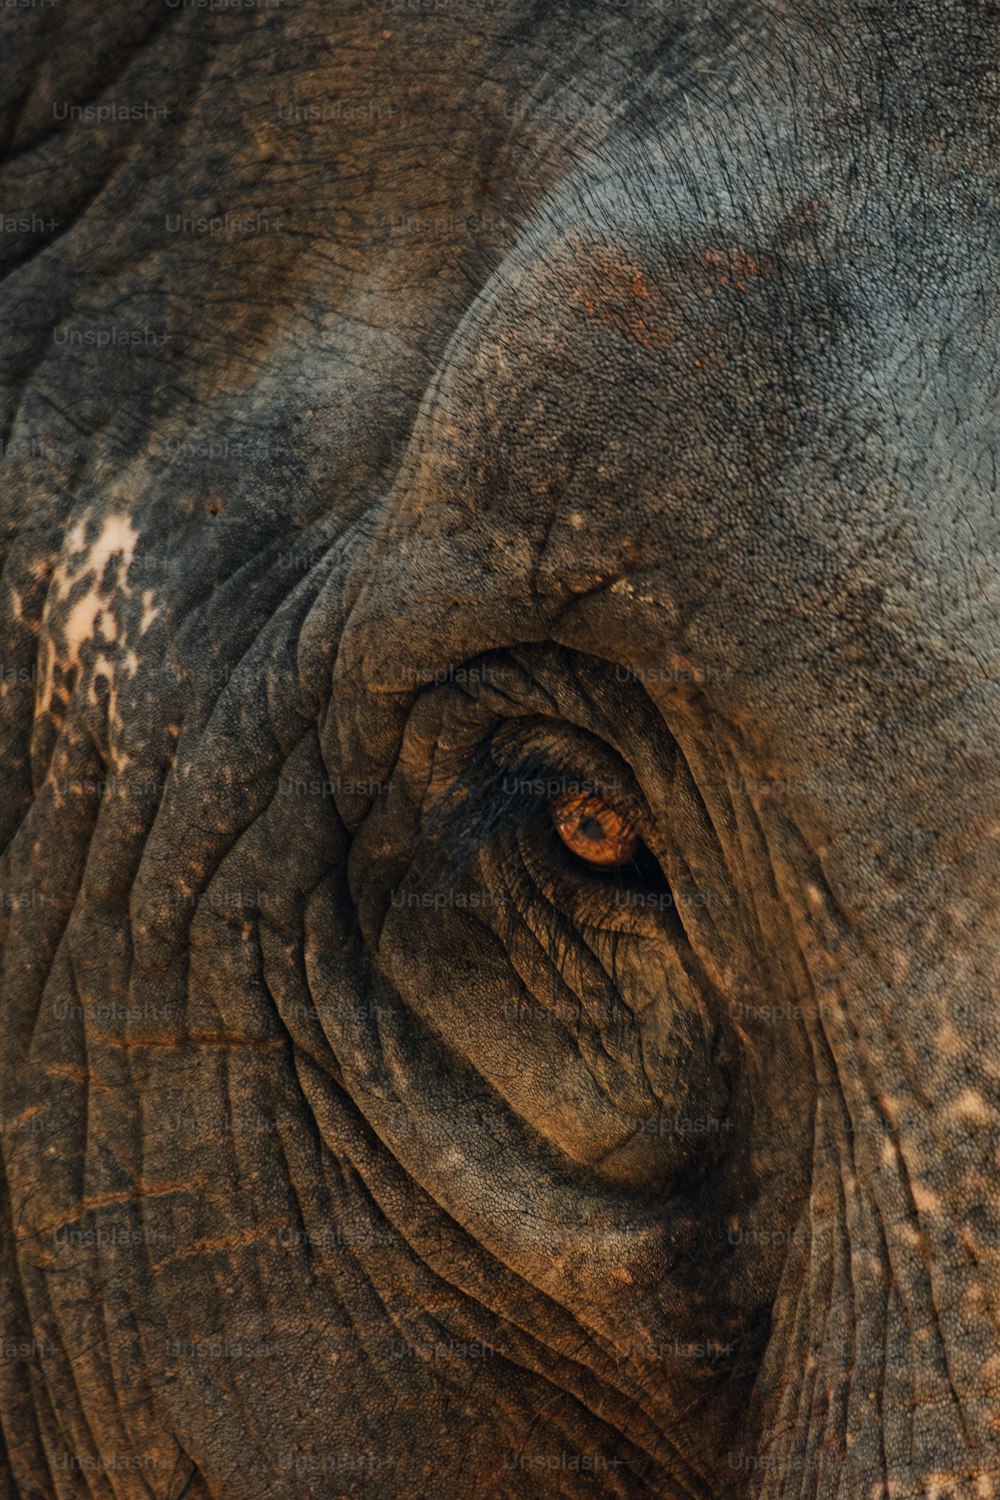 a close up of an elephant's eye with wrinkles